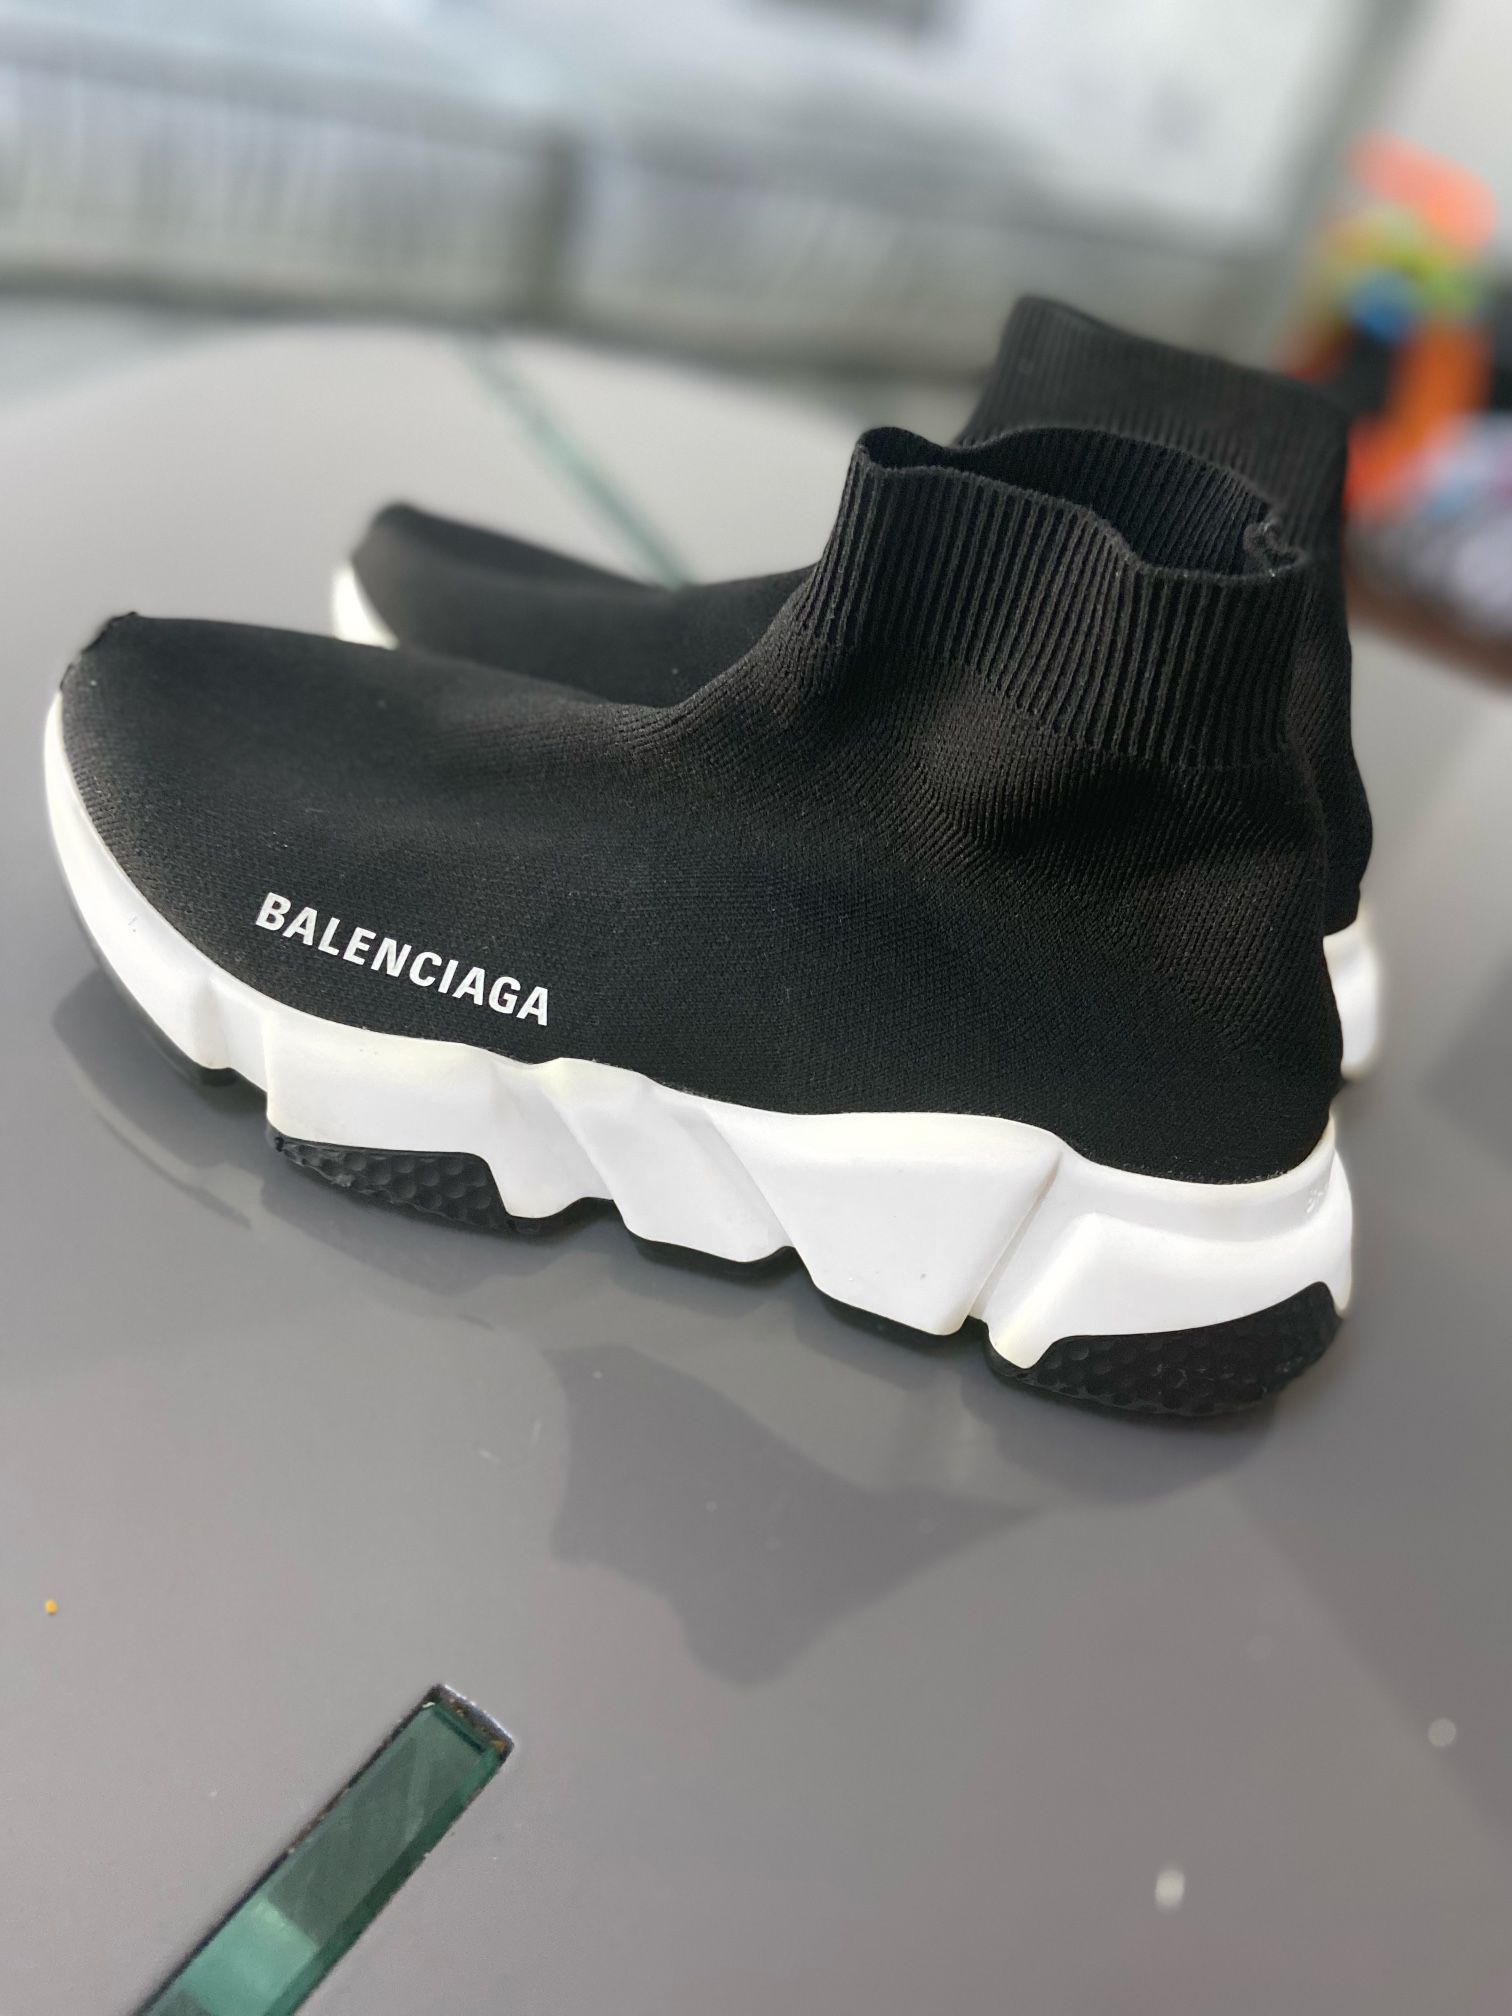 BALENCIAGA Speed Trainer Sock Sneakers Black Slip-On Sneakers AUTHENTIC - 36 (6W) for Sale in Los - OfferUp